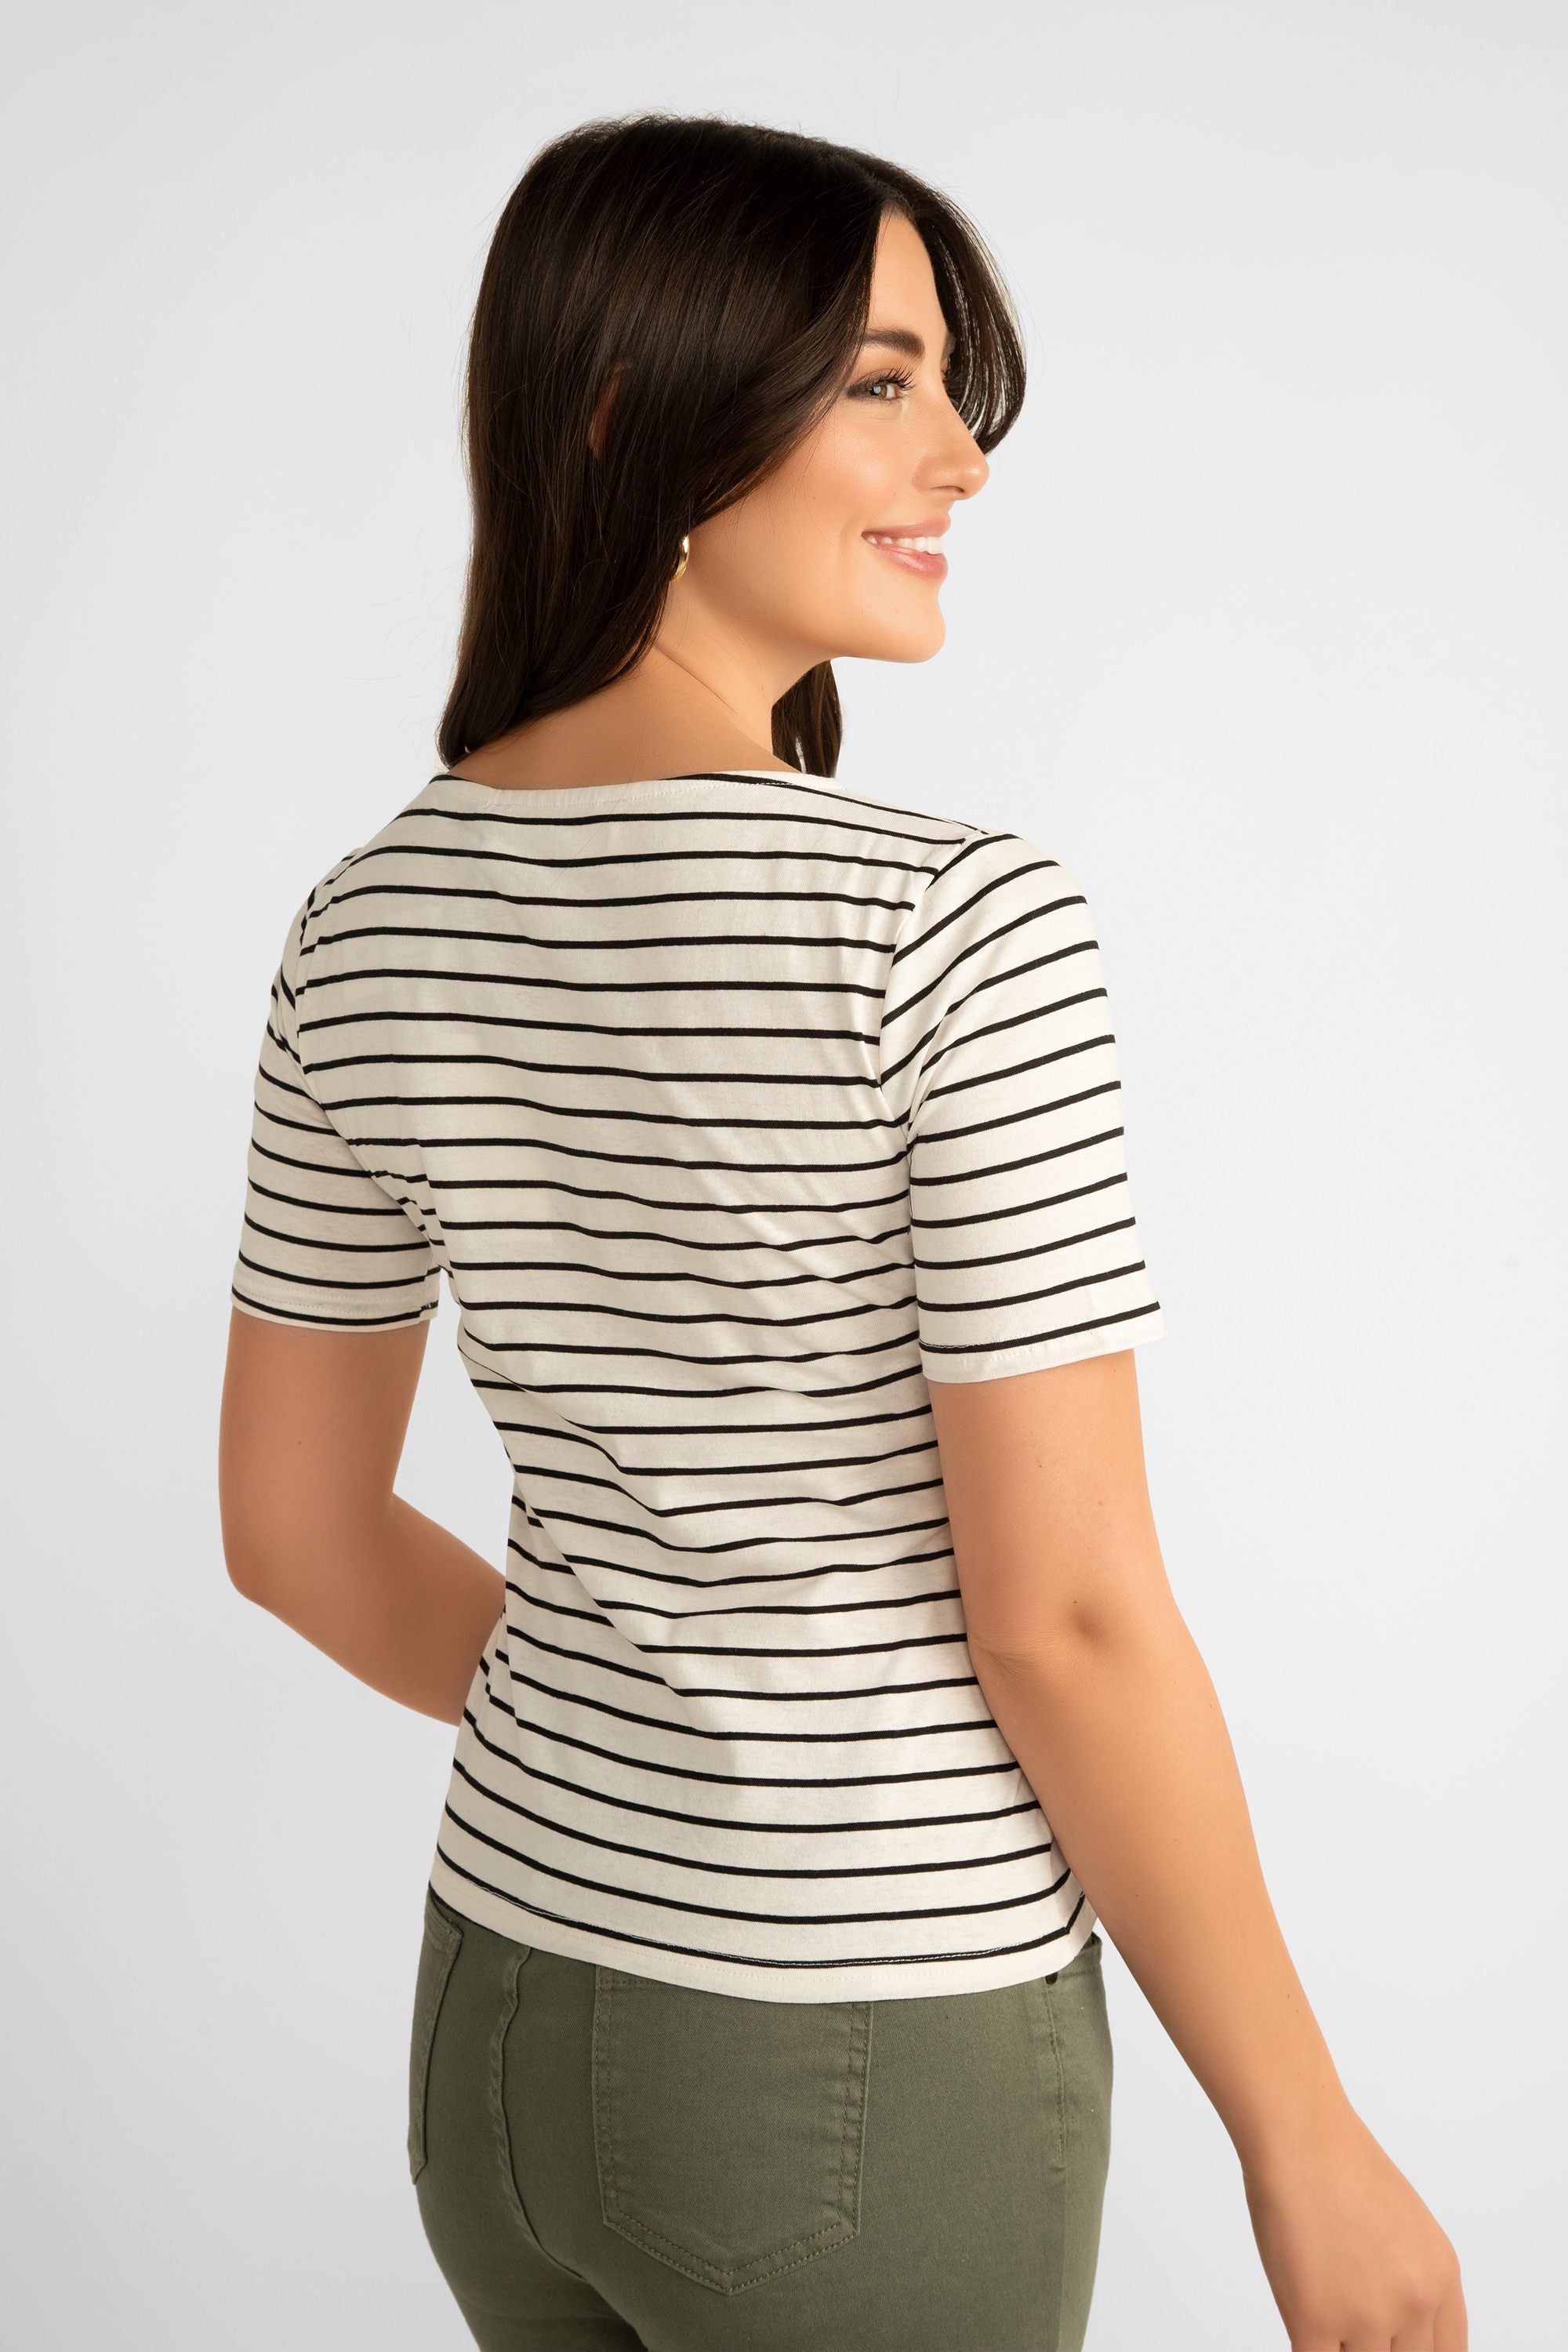 Back view of Pink Martini (TO-41128B) Women's Short Sleeve Striped Tee in Beige with Thin black horizontal stripes